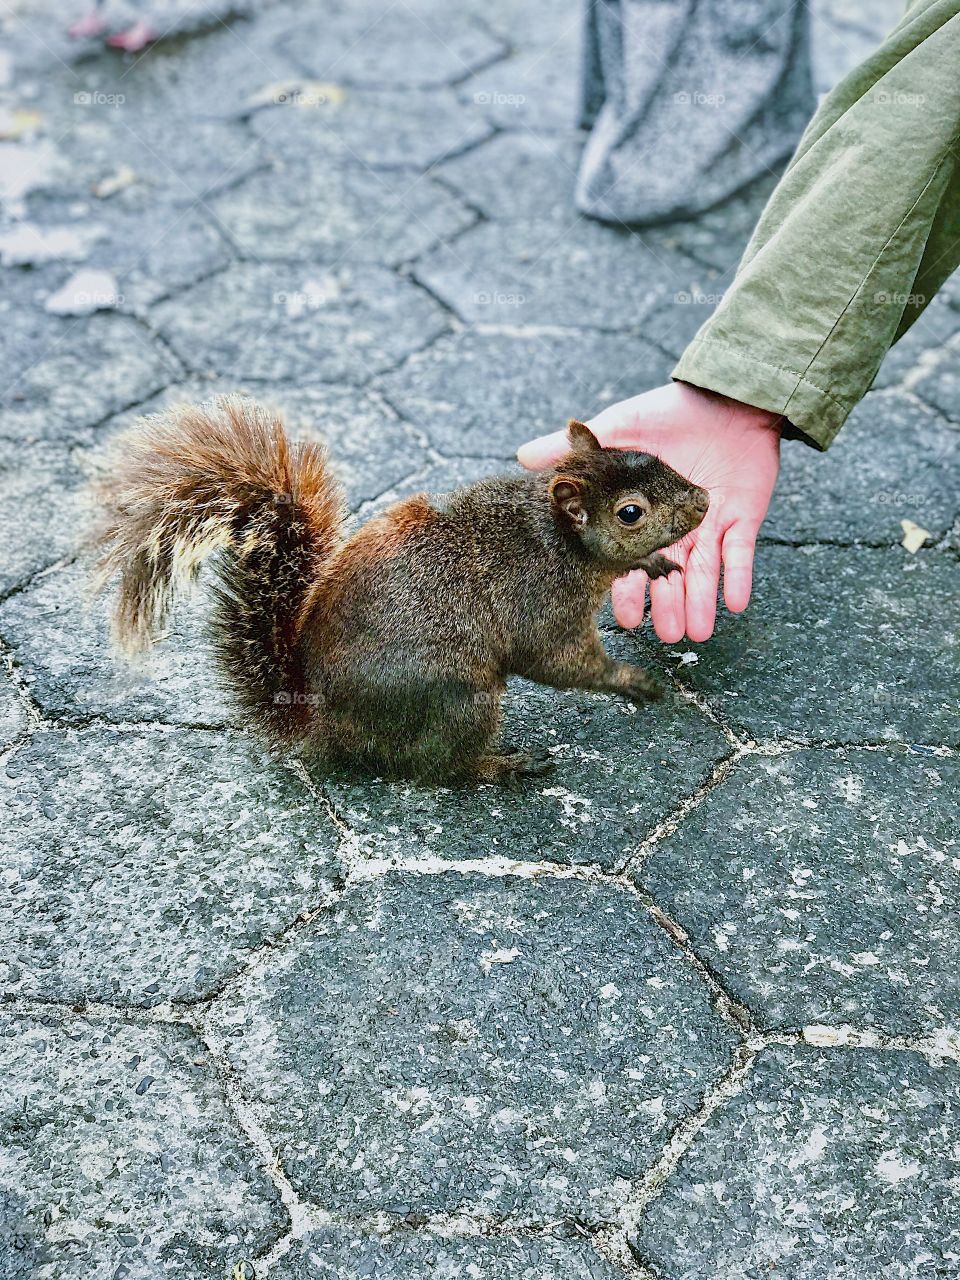 Friendly and unusually dark and chubby squirrel in Central Park New York City 